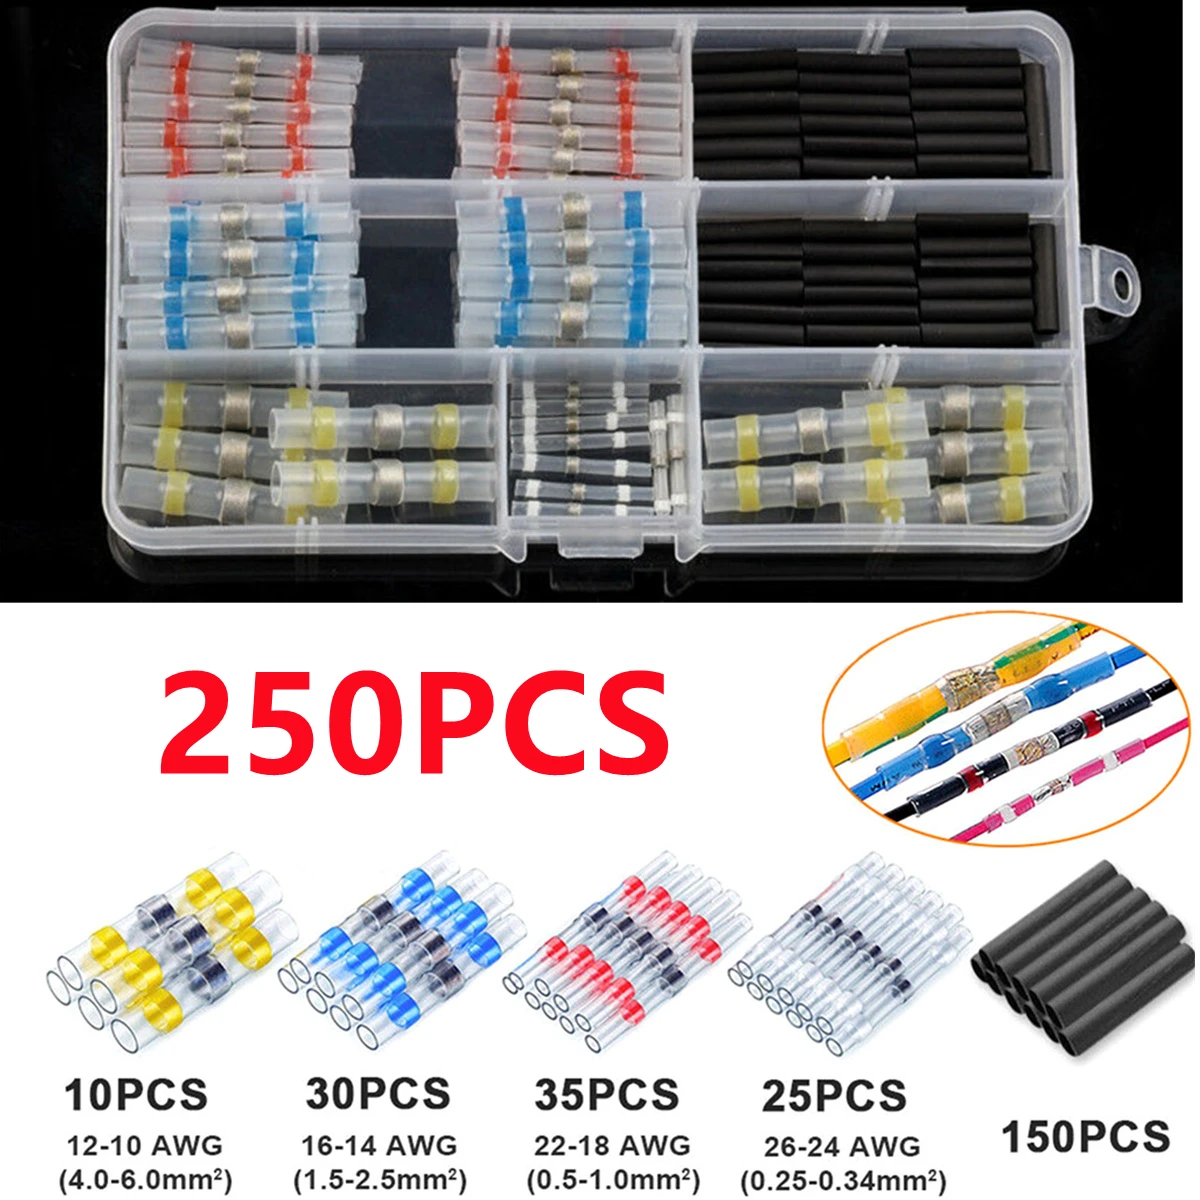 

100/250PCS Heat Shrink Butt Connectors Waterproof Solder Seal Sleeve Tube Electrical Wire Insulated Tinned Copper Terminals Kit